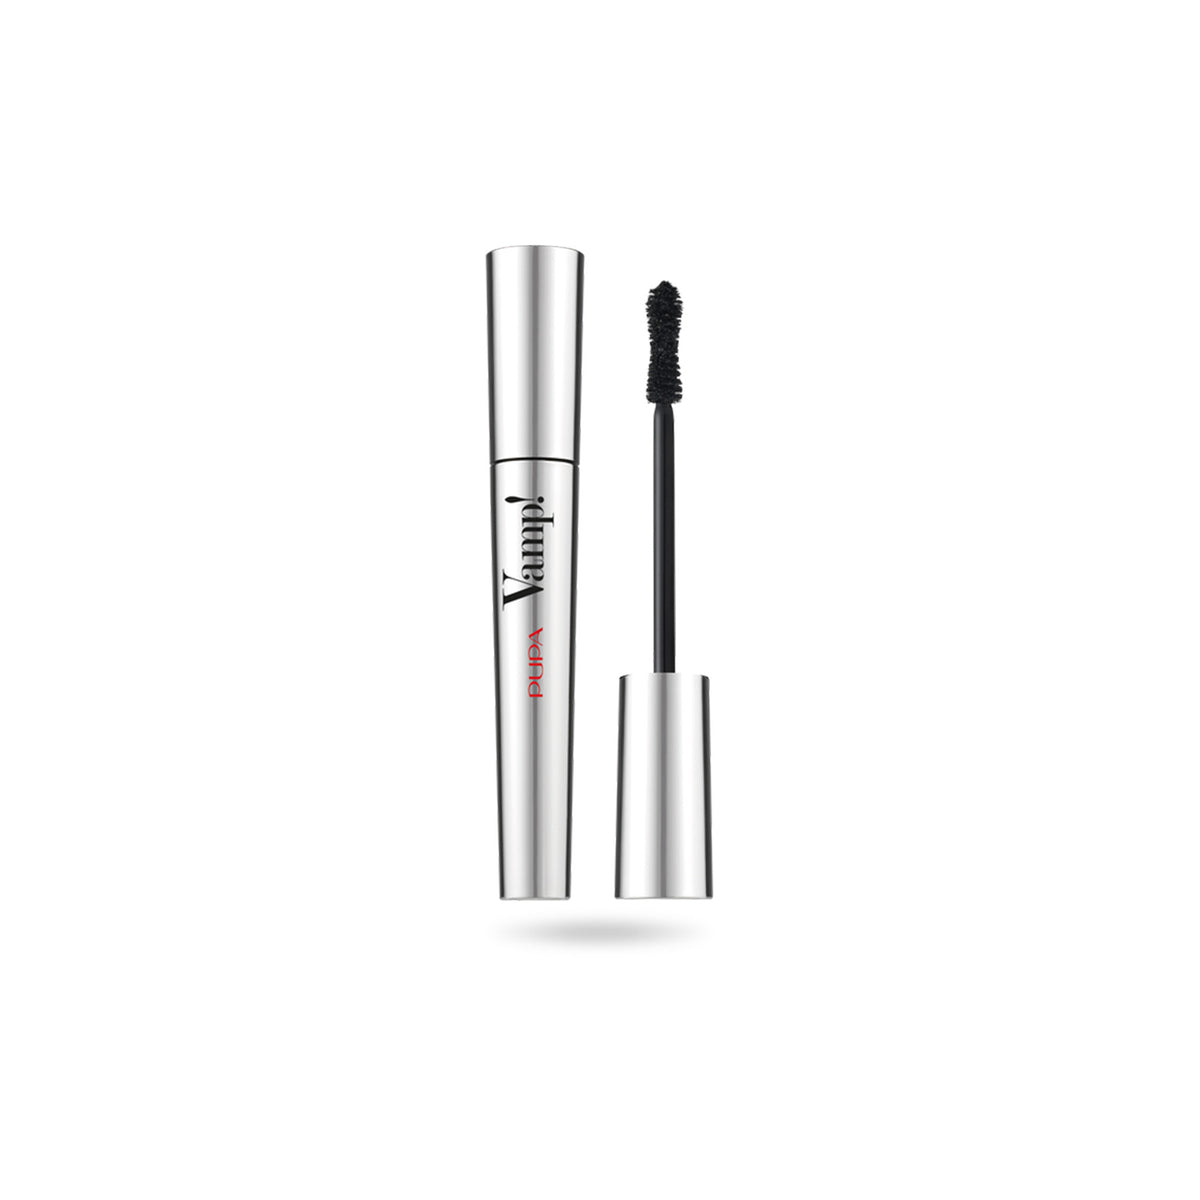 Vamp! Mascara - Exceptional Volume Exaggerated Lashes